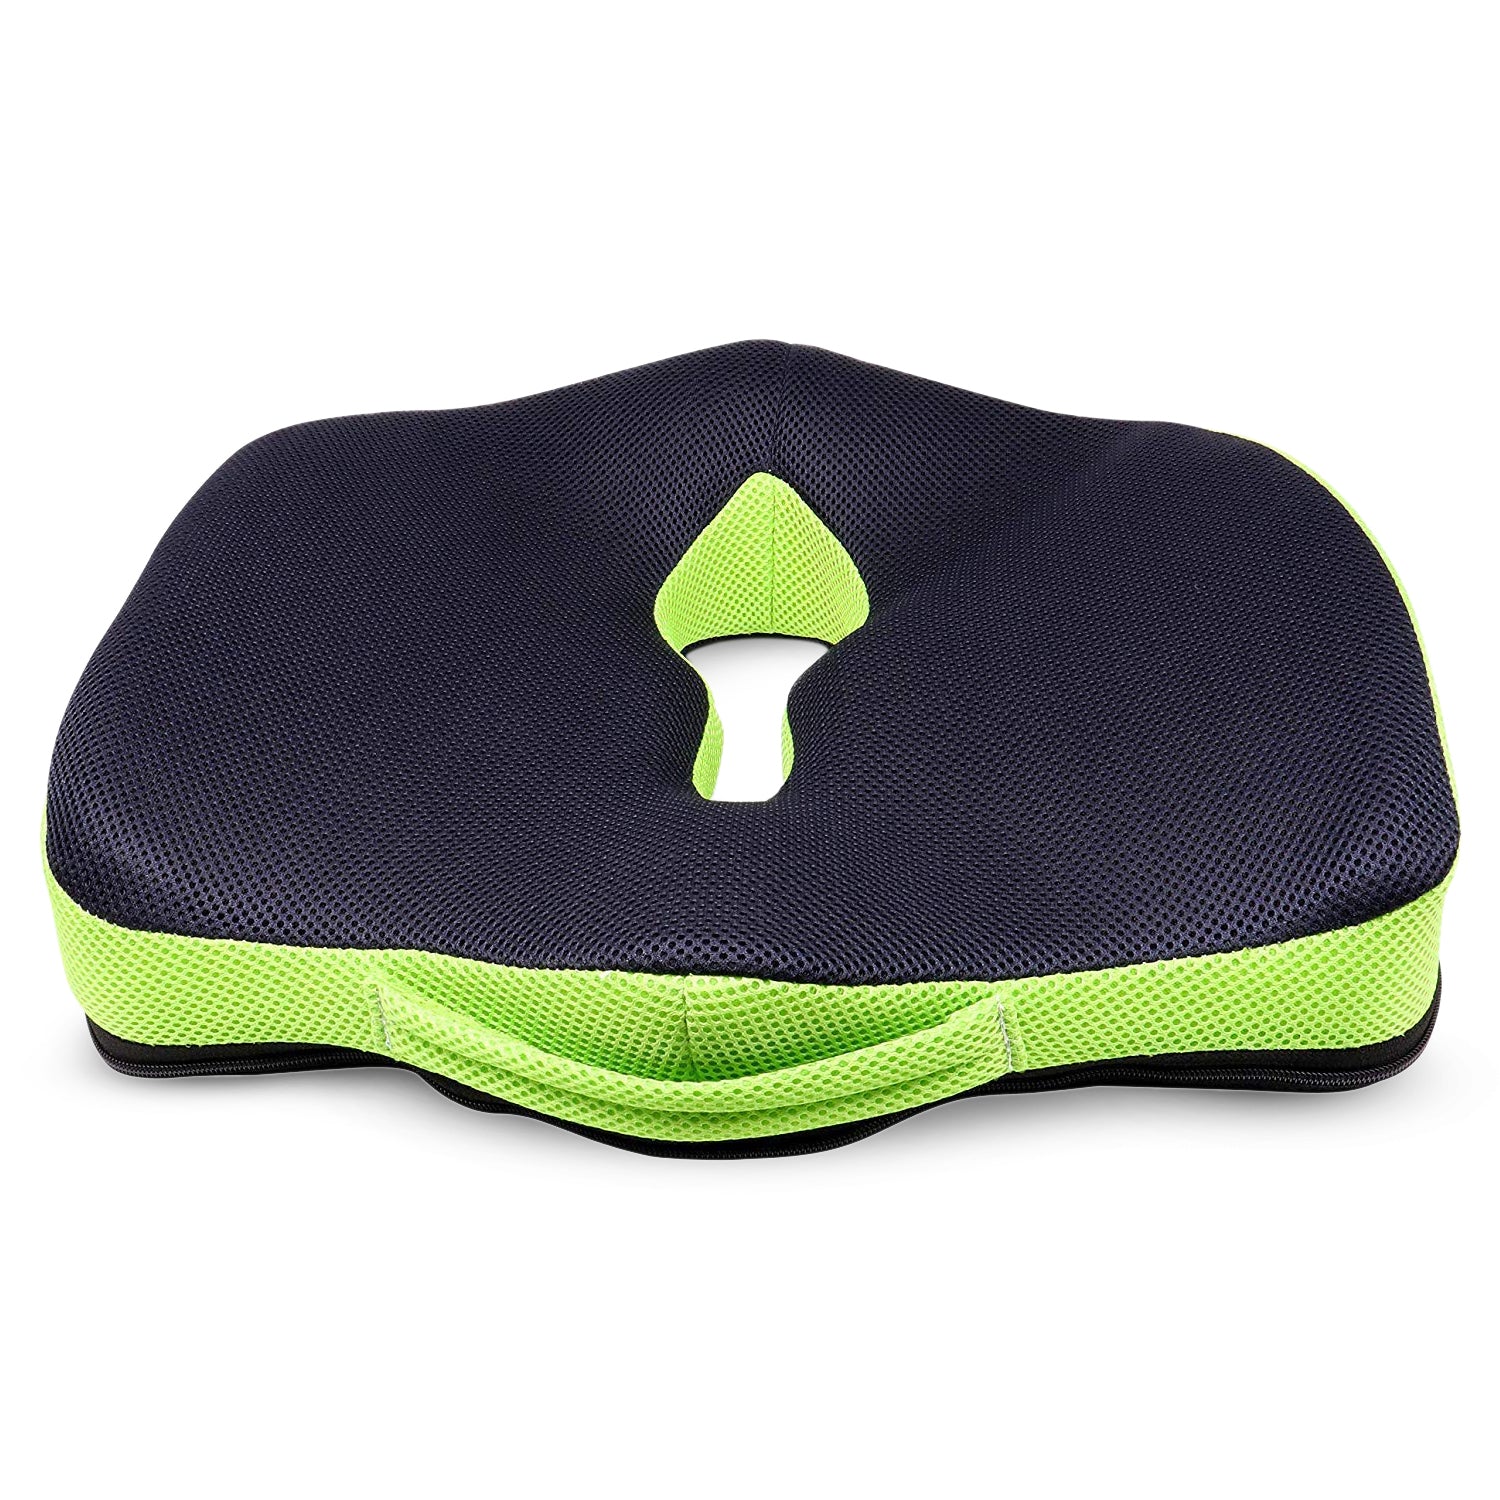 Does a coccyx cushion help? - Quora